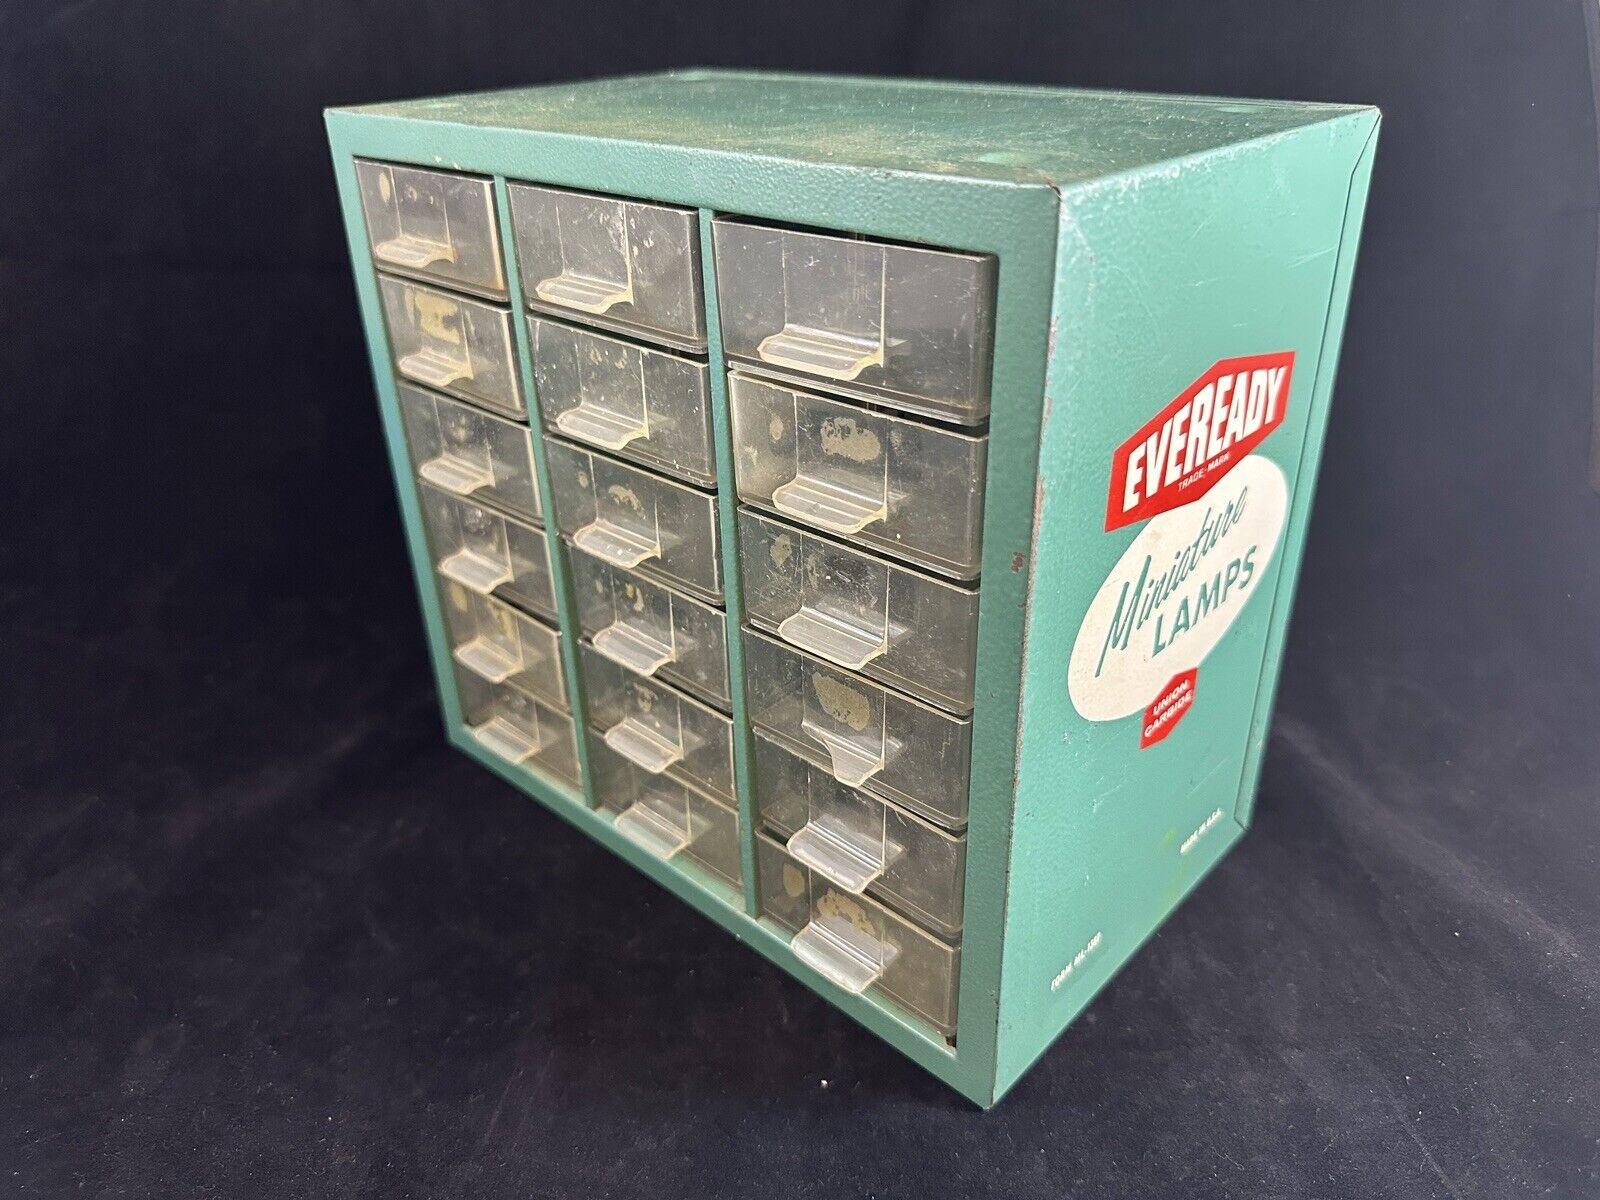 Vintage Eveready Miniature Lamps Metal Hardware Store Display Cabinet